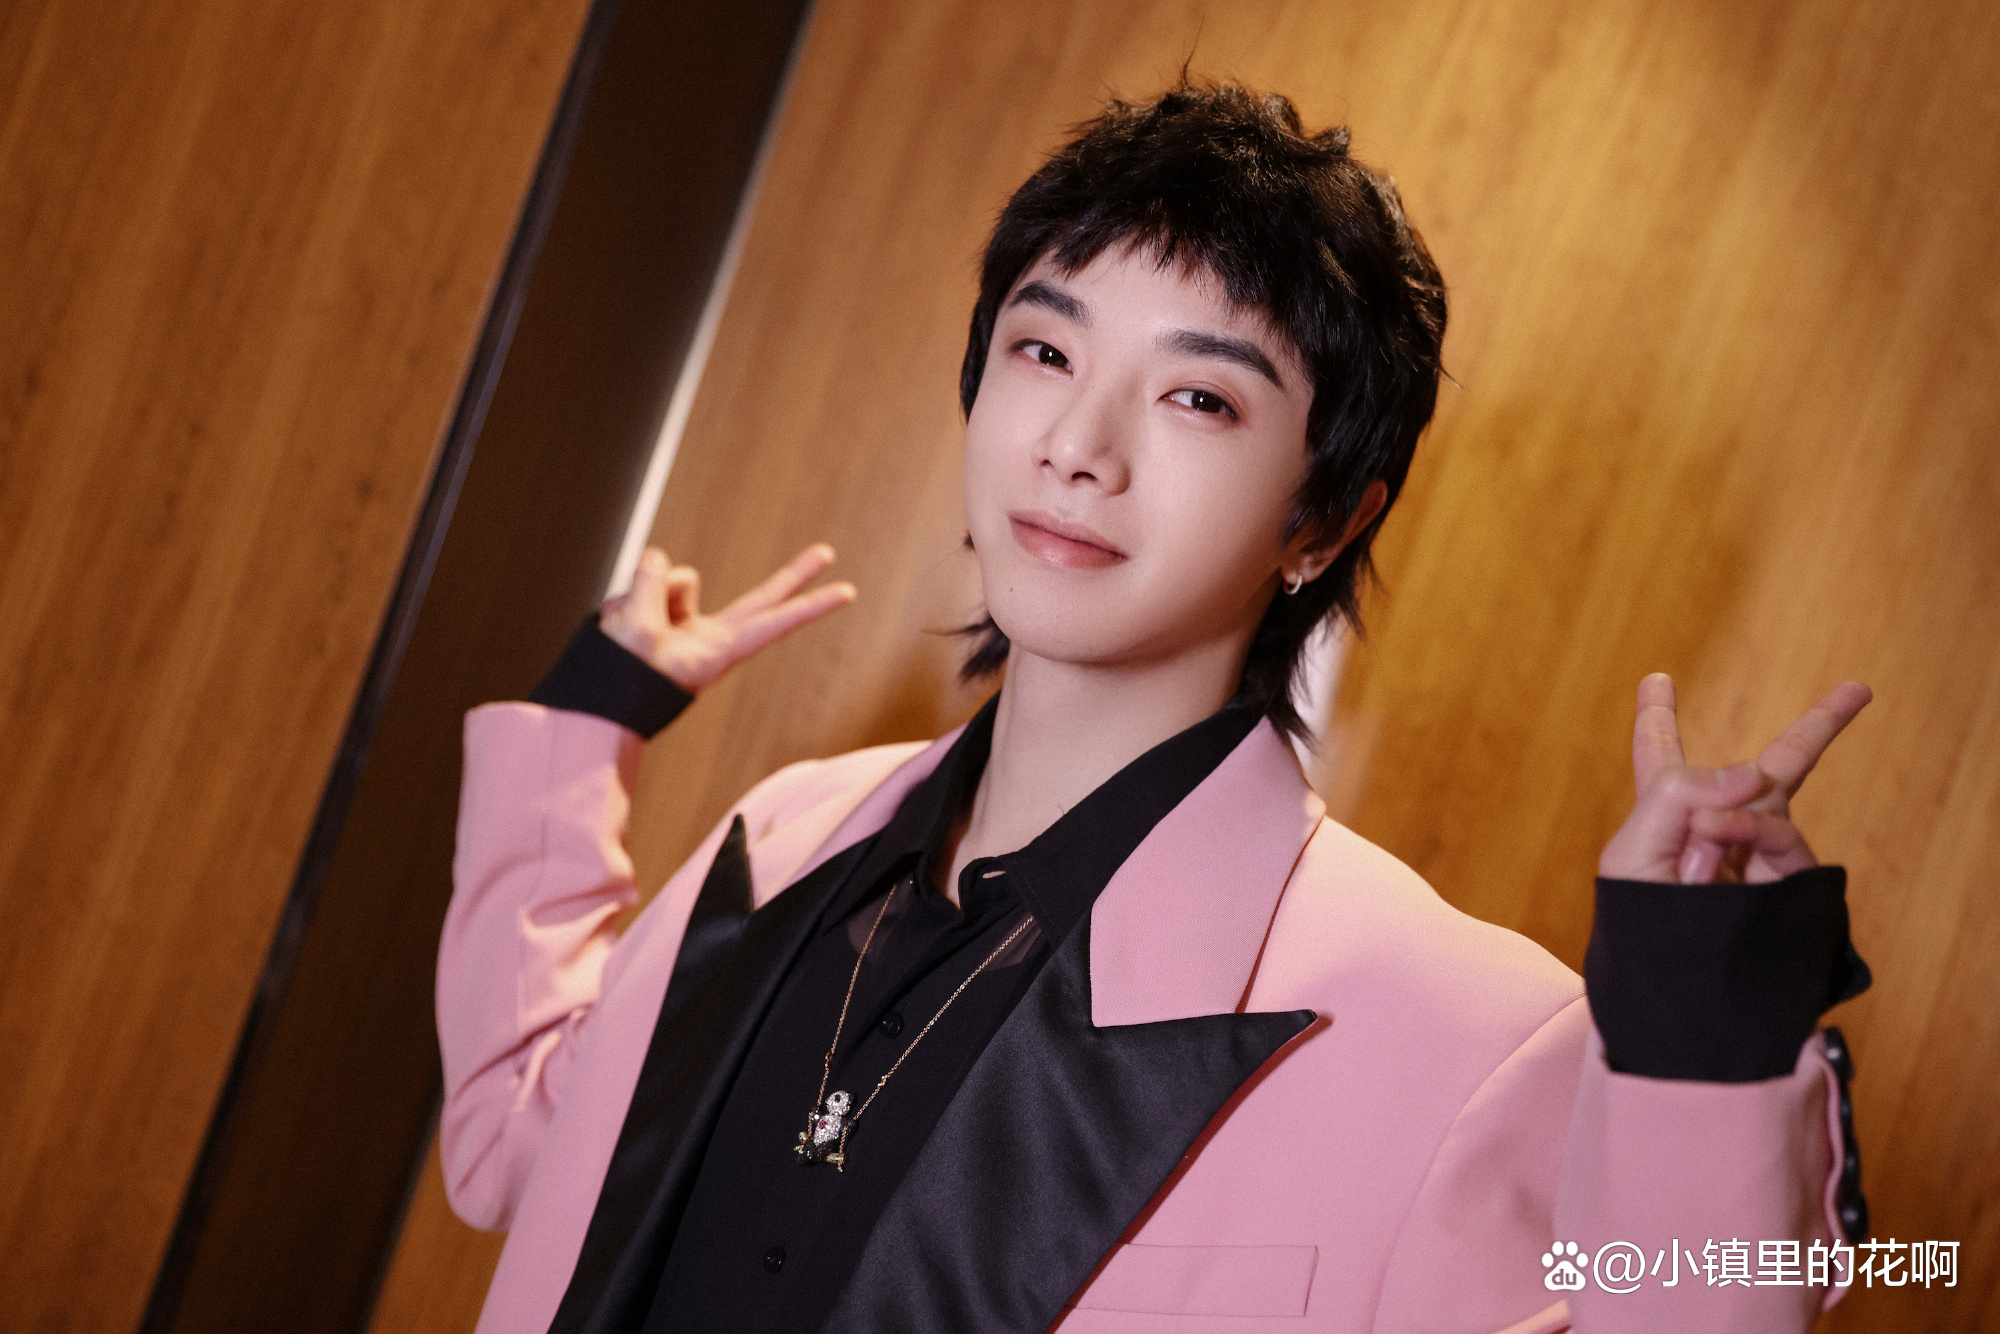 Can the same person be so different?Hua Chenyu's rehearsal video leaked,  the contrast between the back and short hair is cute - iMedia